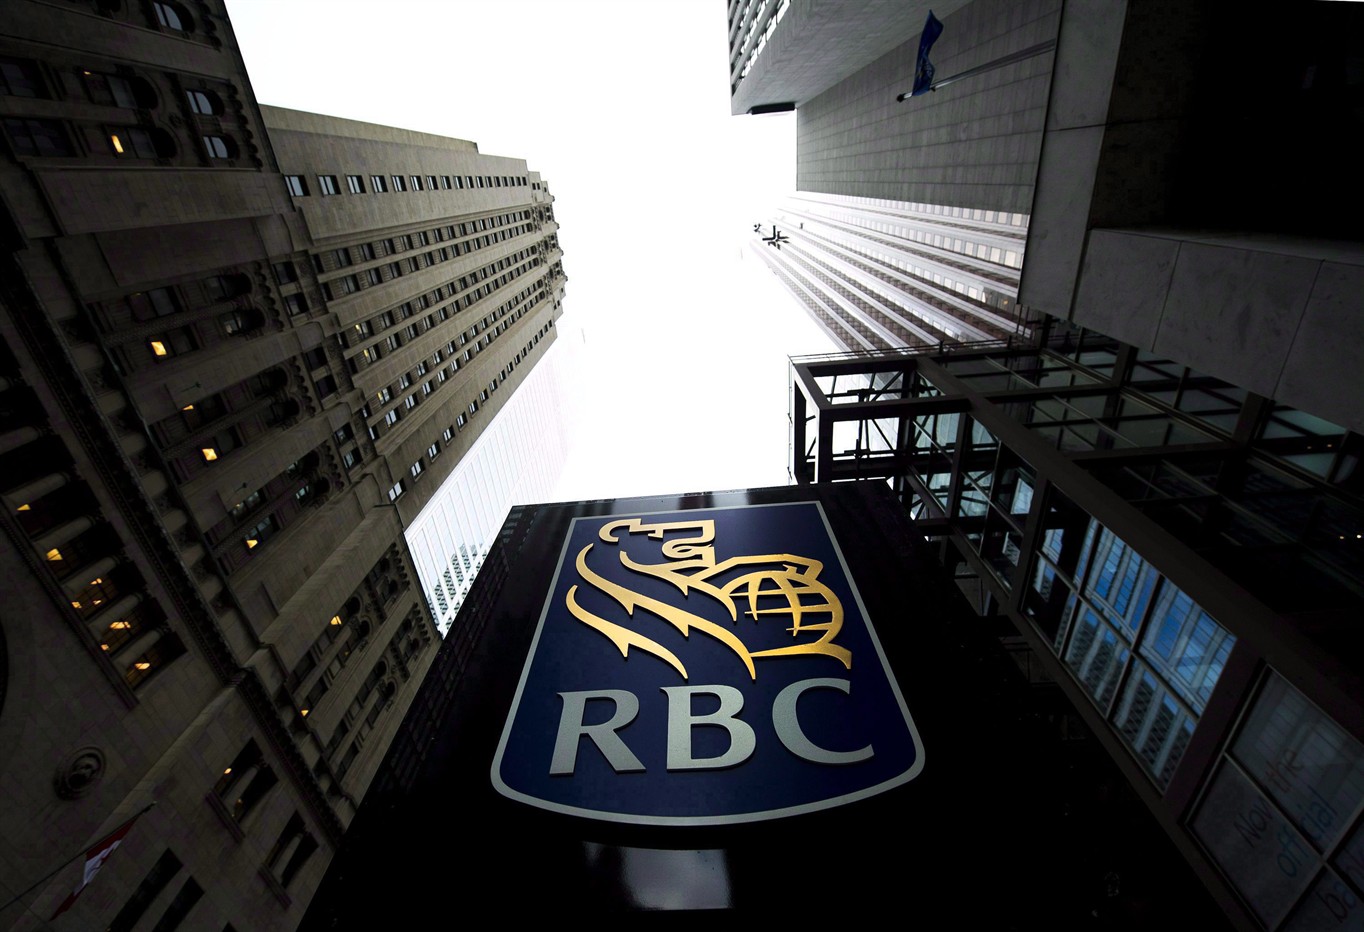 Royal Bank To Cut Jobs Primarily At Head Office Locations In